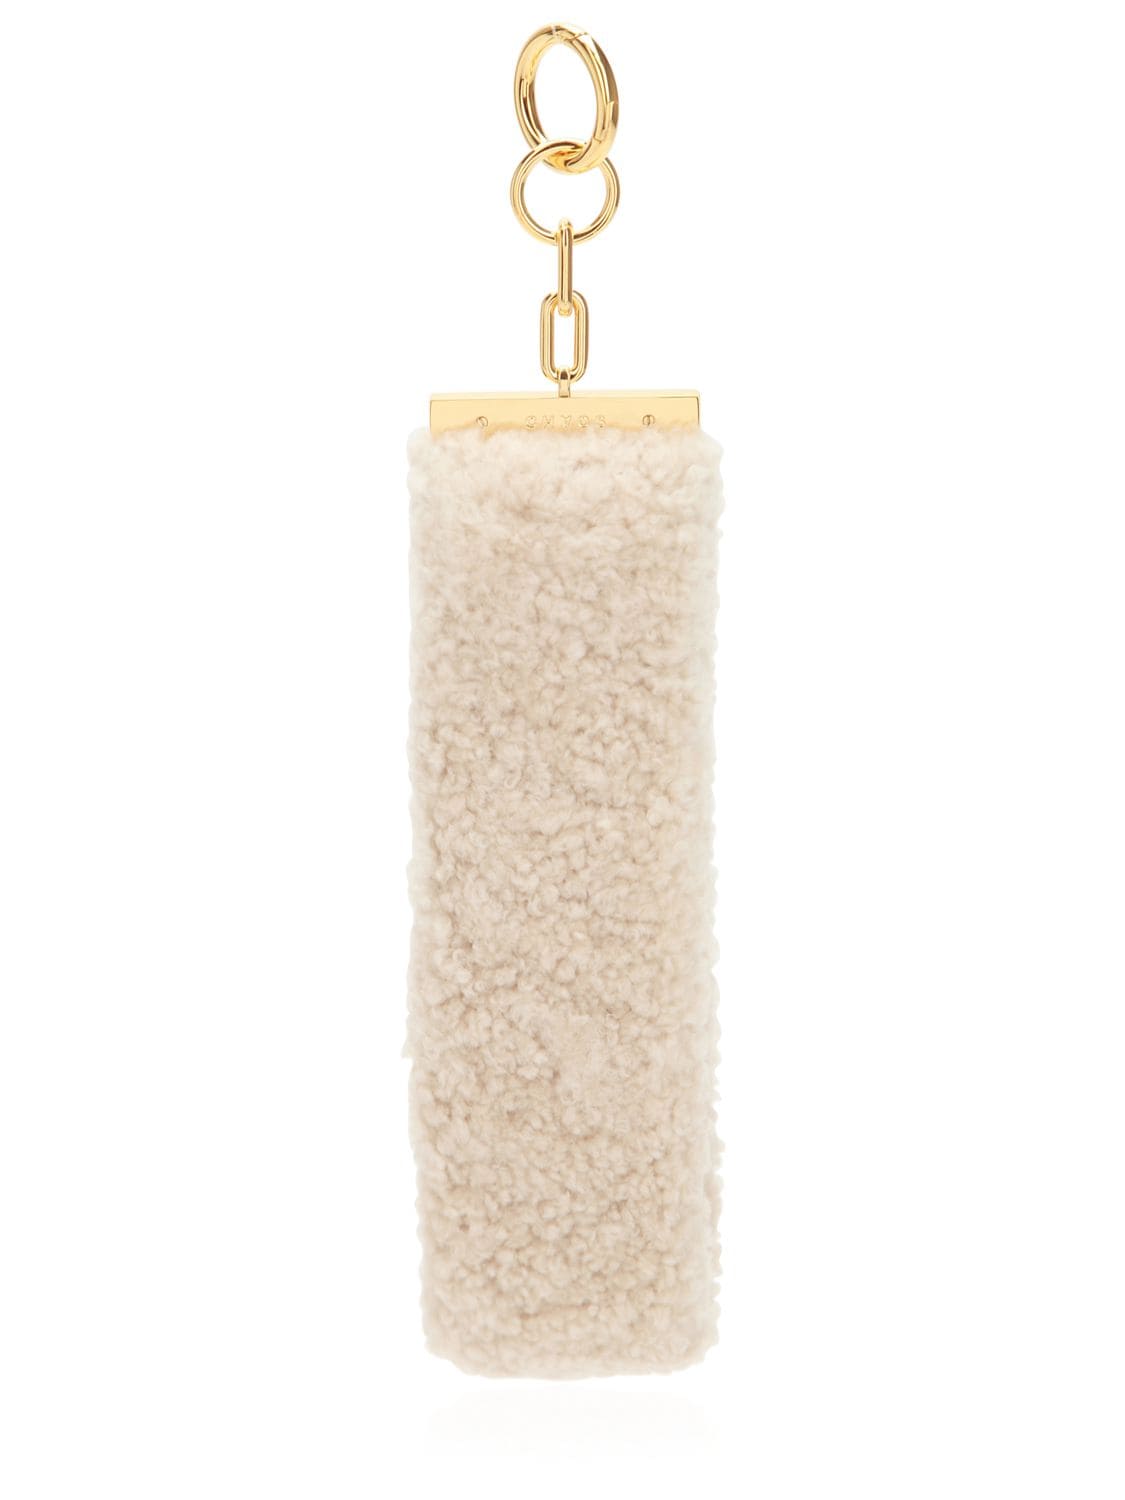 Chaos Hand Strap Leather Key Holder In Cream